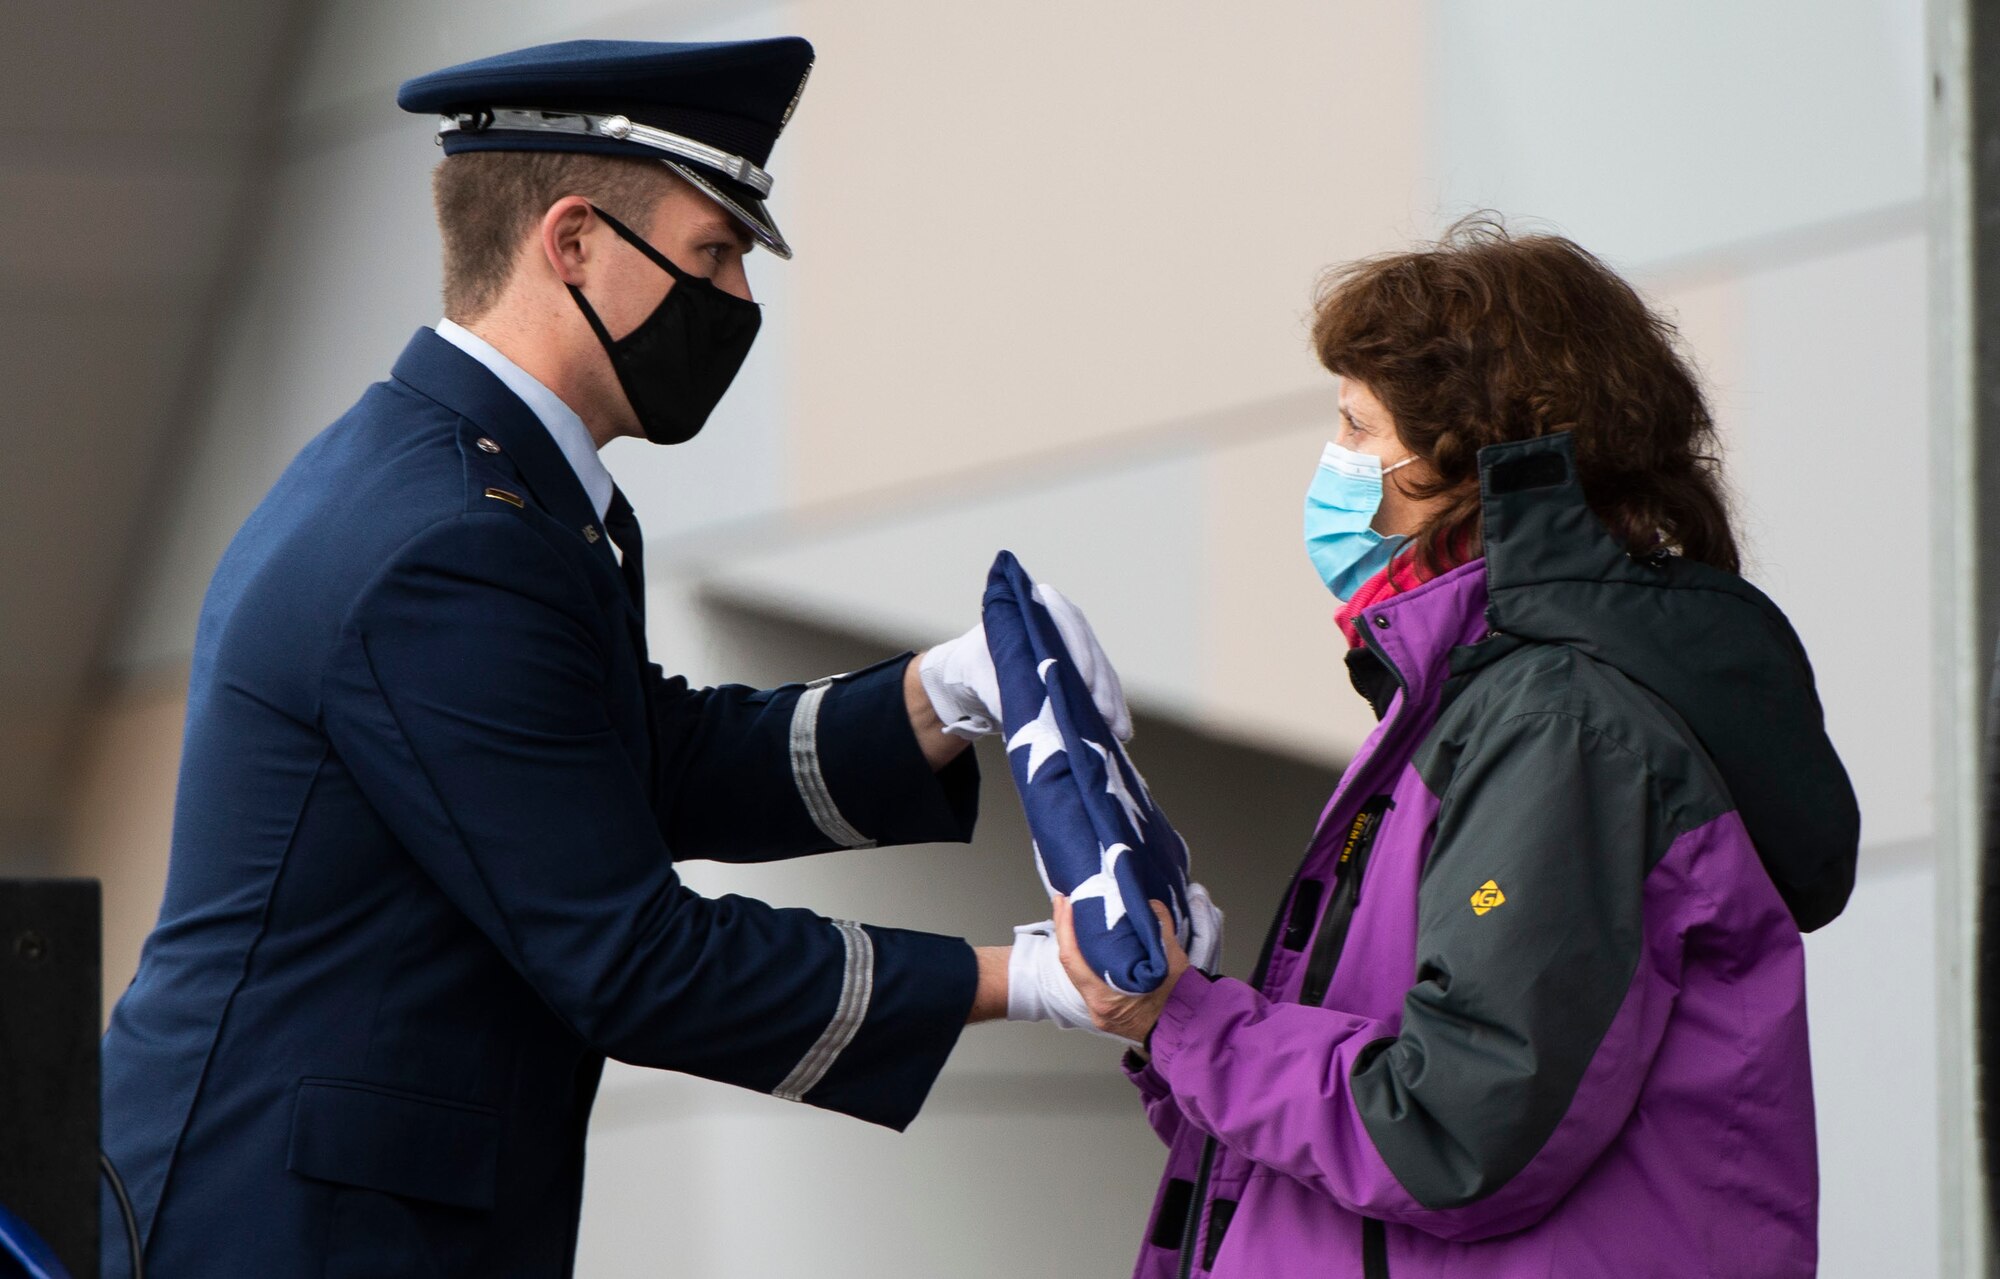 A ceremonial guardsman from Wright-Patterson Air Force Base, Ohio, presents the American flag to Victoria Yeager during the “Celebration of Life” service for Retired Brig. Gen. Chuck Yeager at the Charleston Coliseum & Convention Center in Charleston, West Virginia, Jan. 15, 2021. Yeager was an Air Force flying ace and test pilot who in 1947 became the first in history confirmed to have exceeded the speed of sound in level flight. (U.S. Air Force photo by Wesley Farnsworth)